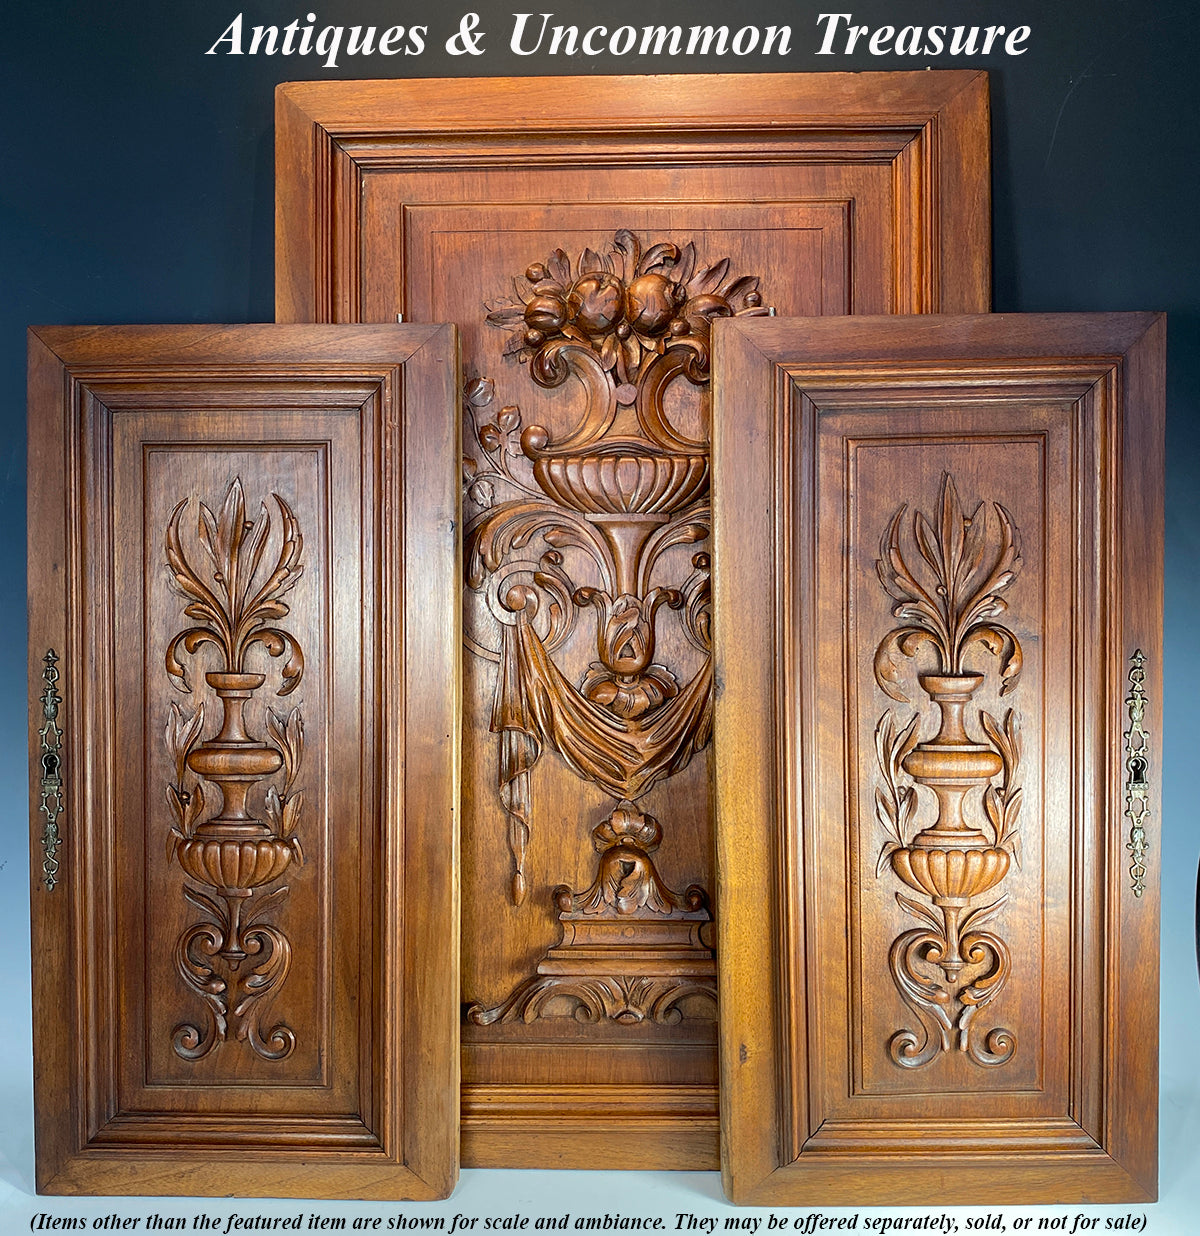 Pair Antique HC French Neoclassical Walnut Hutch or Cabinet Doors, Cabinetry Panels